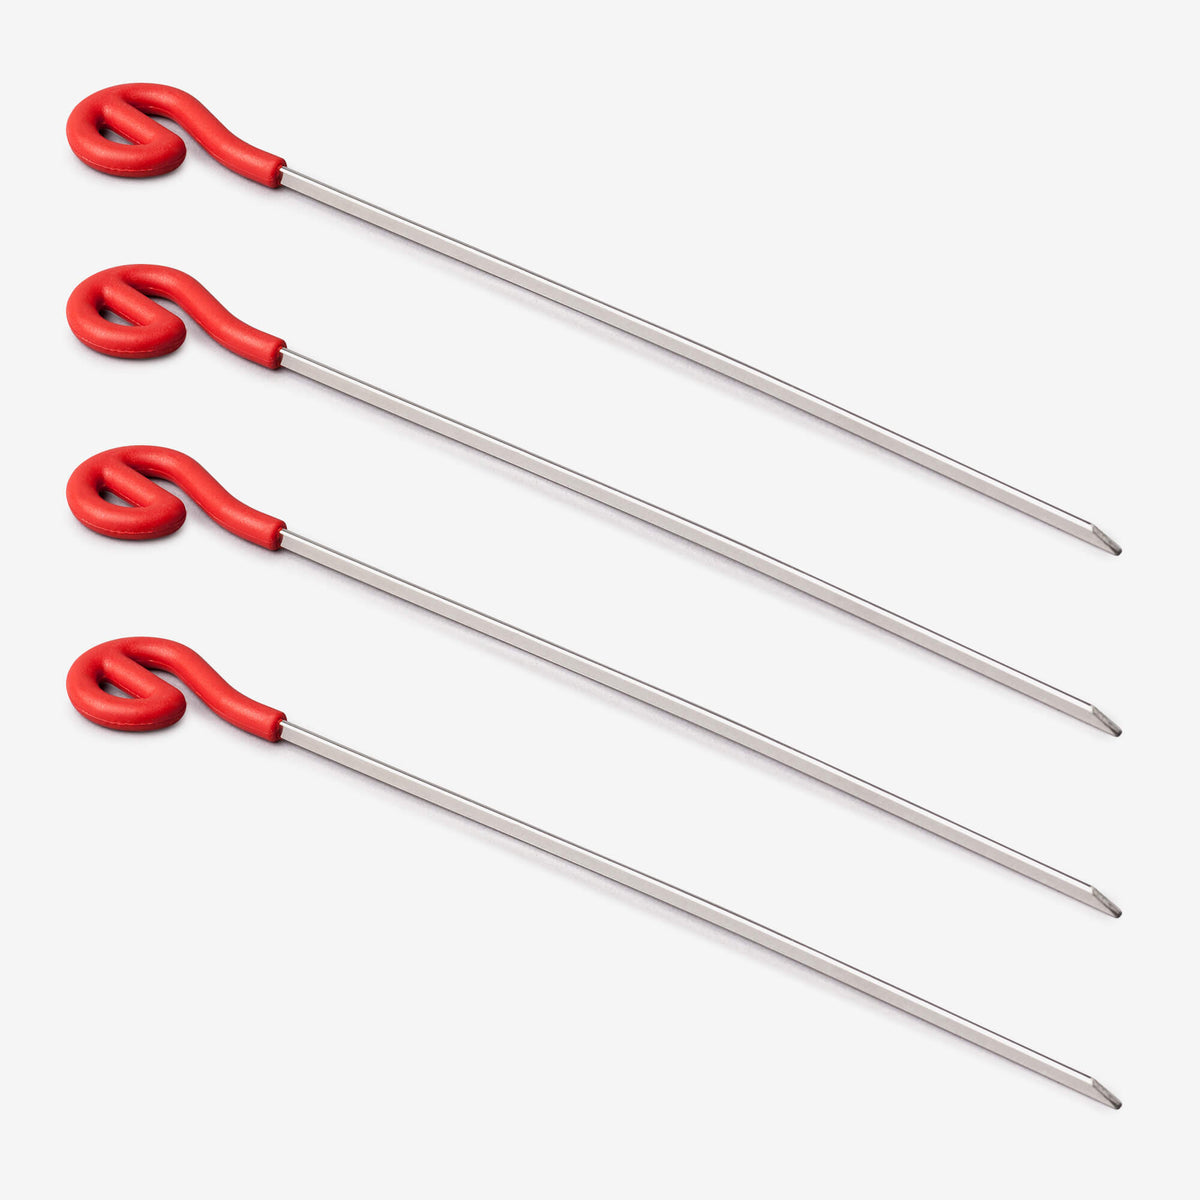 Skewers with Silicone Top, Set of 4, Available in 2 Sizes